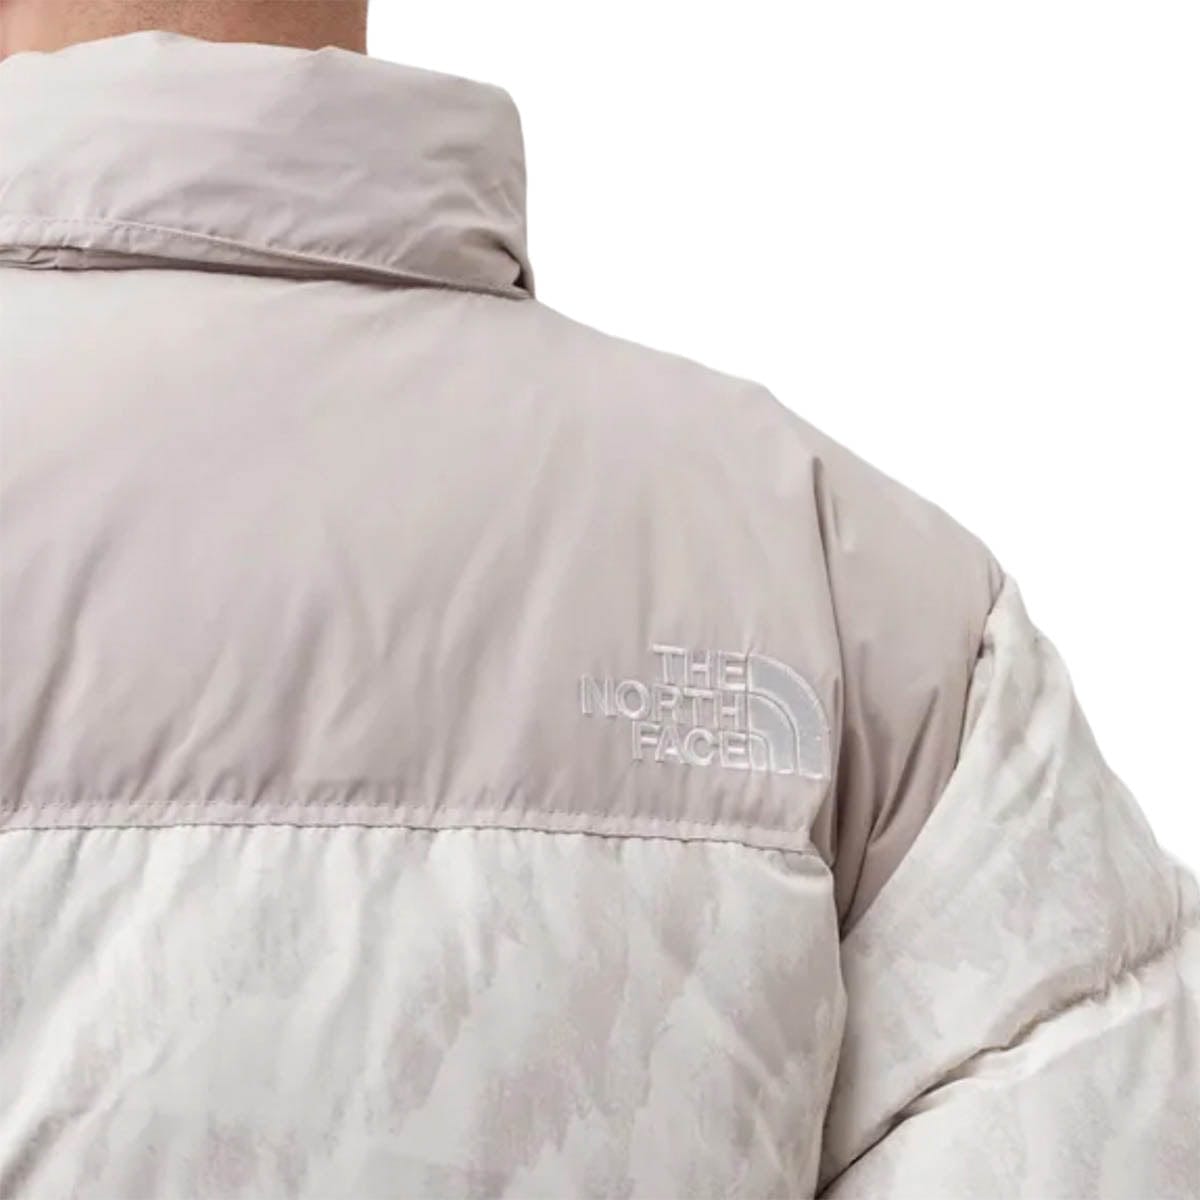 The North Face Outerwear PRINTED 1996 RETRO NUPTSE JACKET